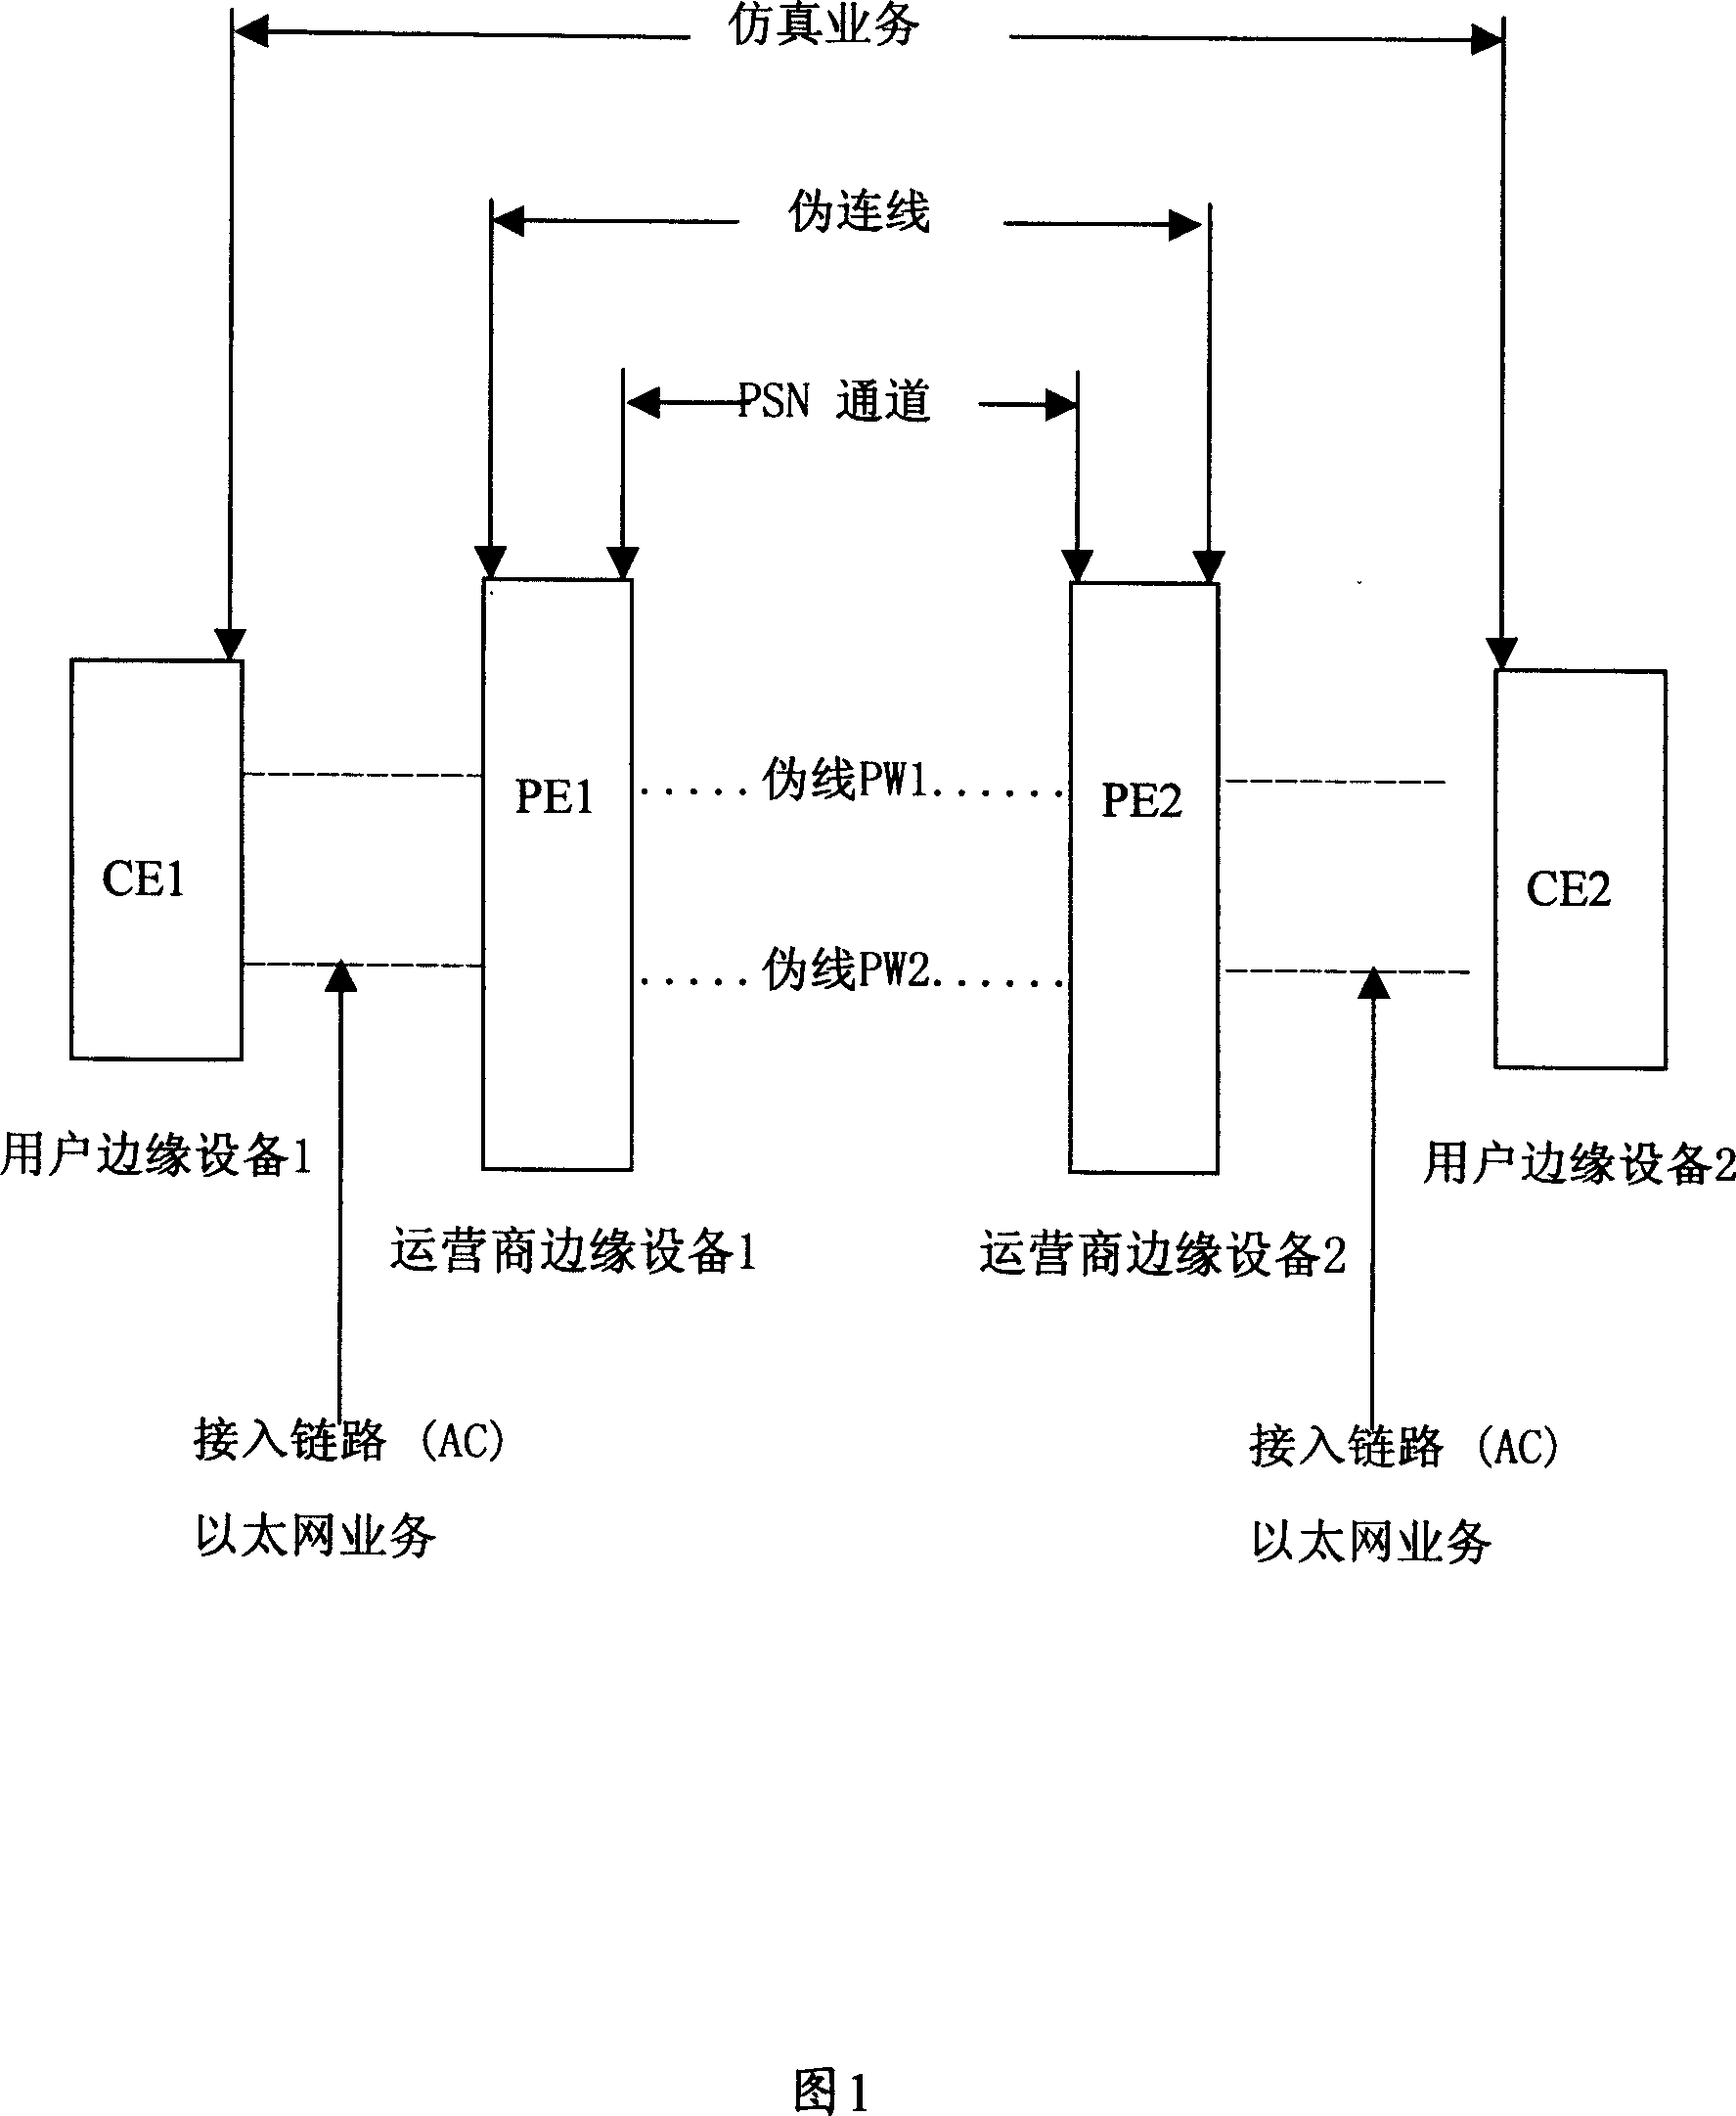 Method and system for end-to-end pseudo-line analog access